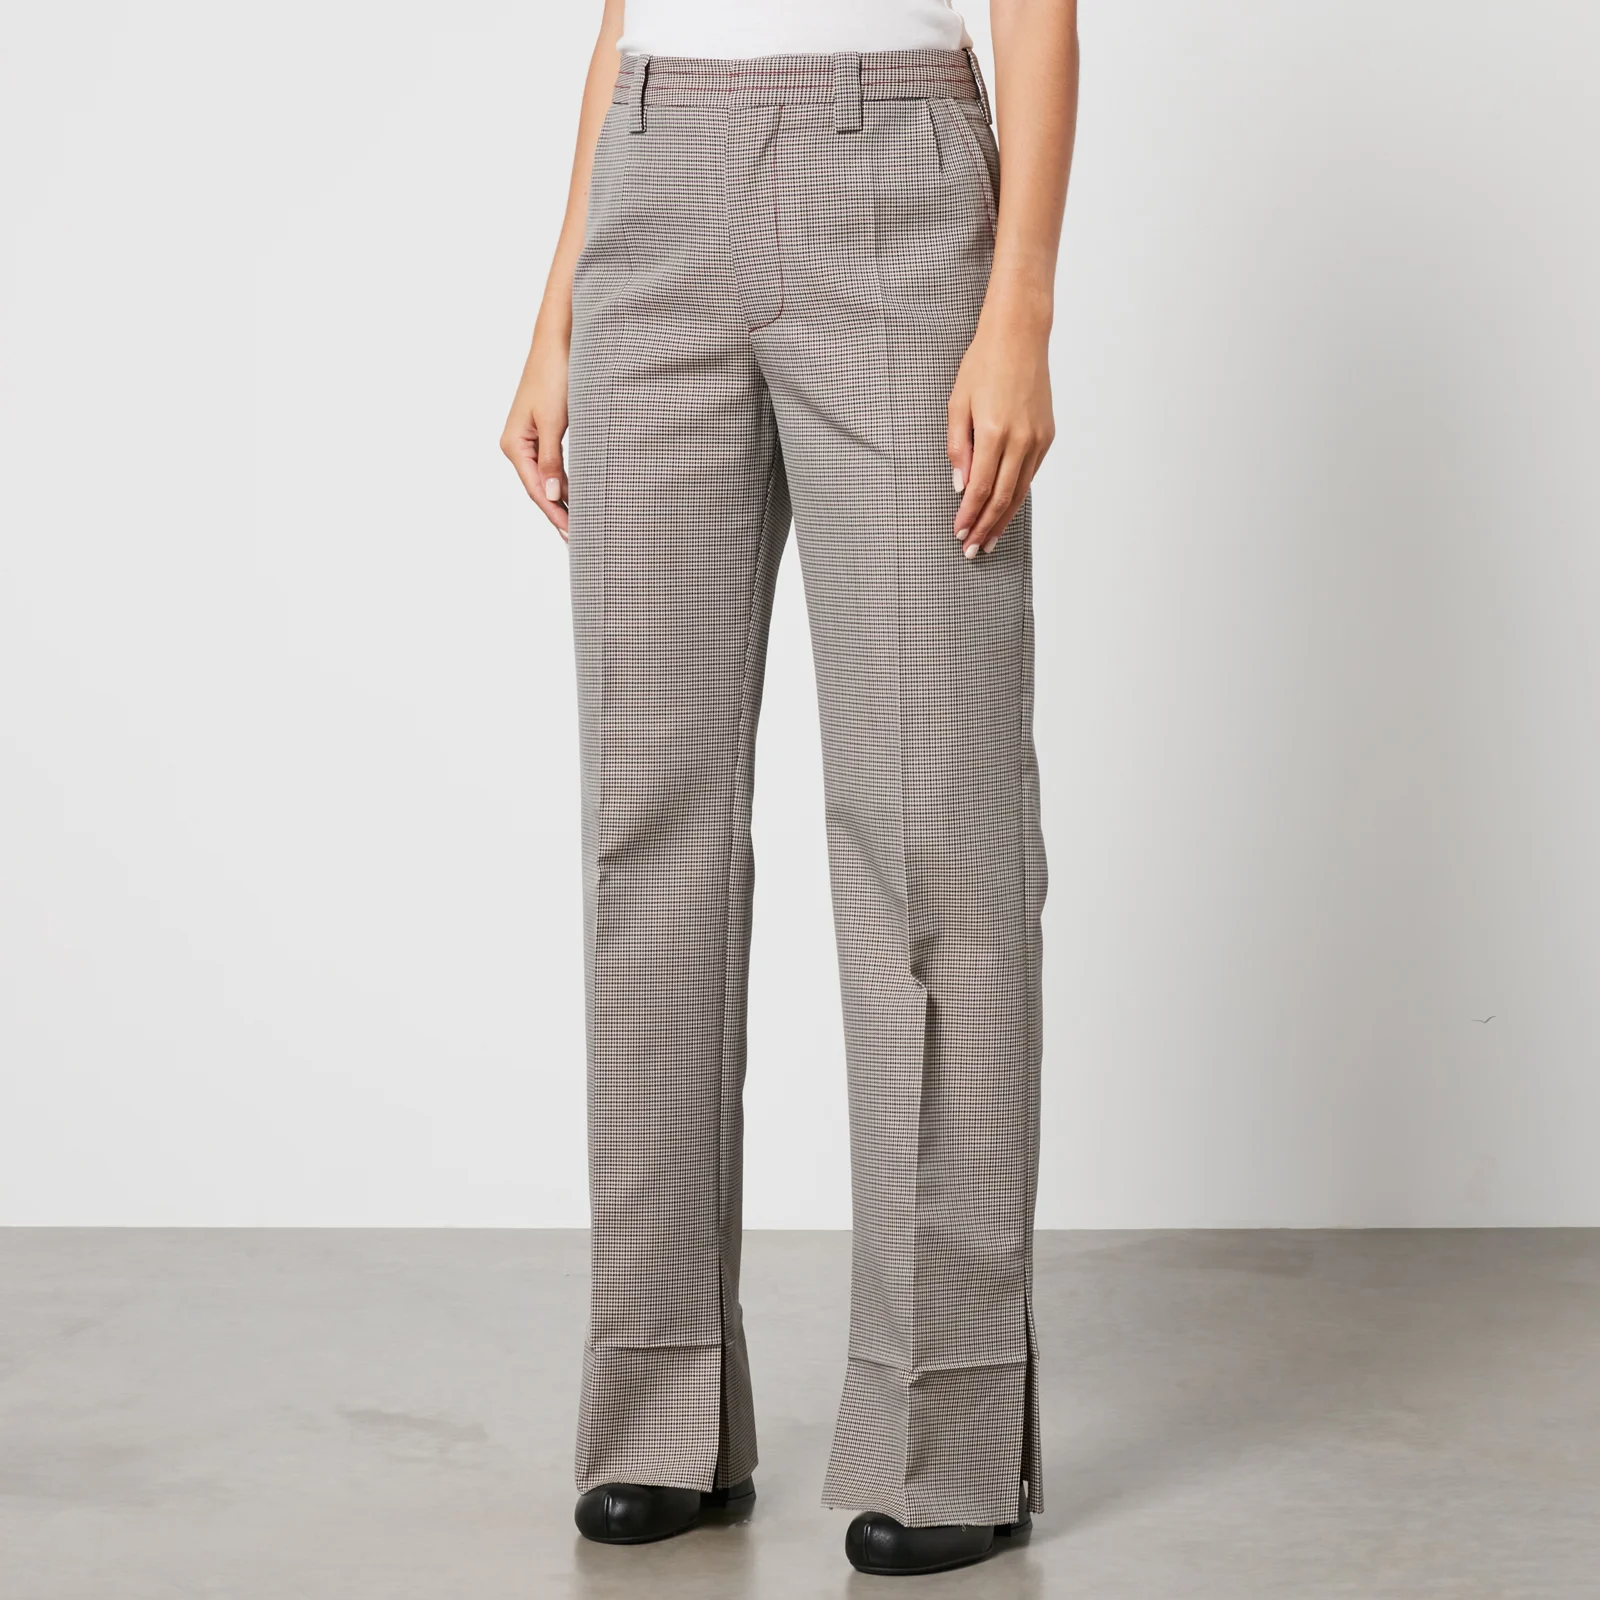 Marni Houndstooth Wool-Blend Trousers Image 1